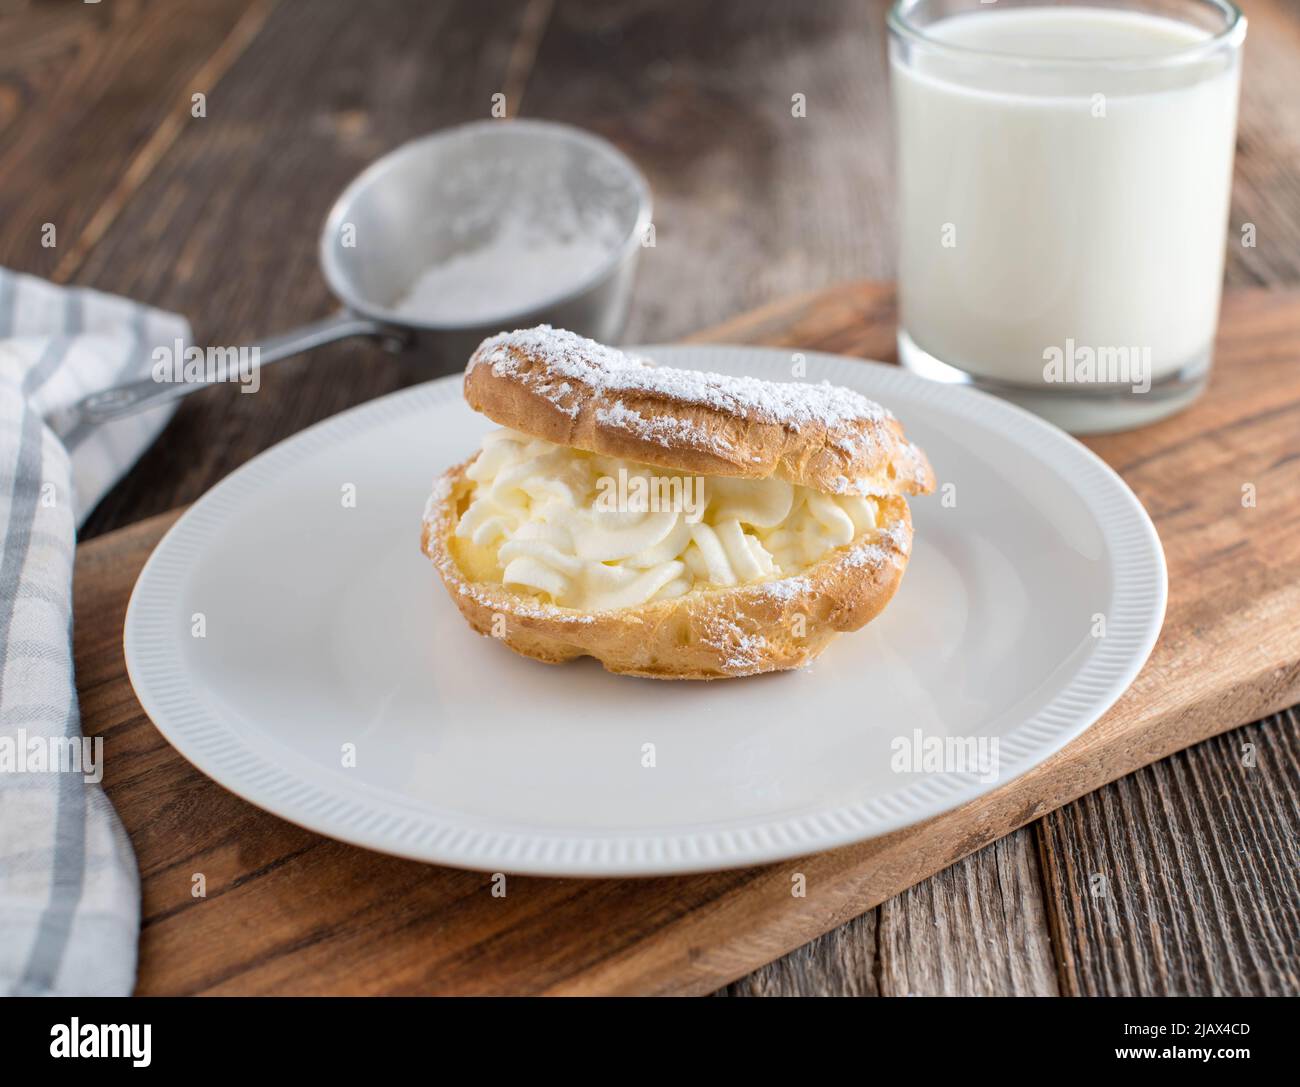 Glass of milk with a piece of pastry Stock Photo